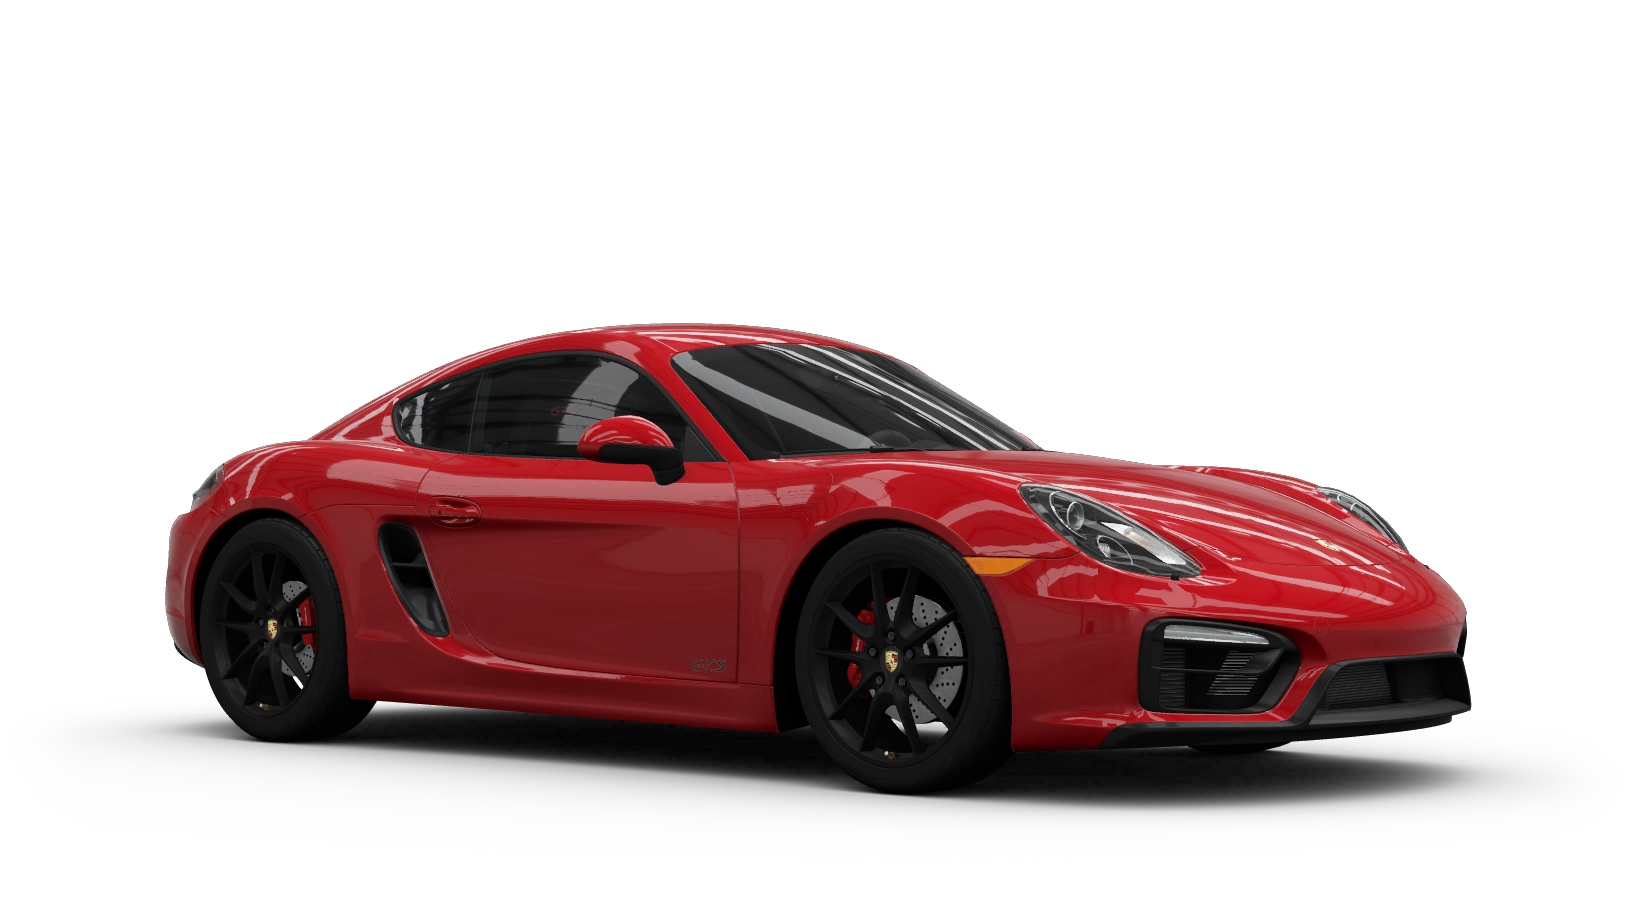 https://static.wikia.nocookie.net/forzamotorsport/images/5/50/HOR_XB1_Porsche_Cayman_15.png/revision/latest?cb=20190902150219